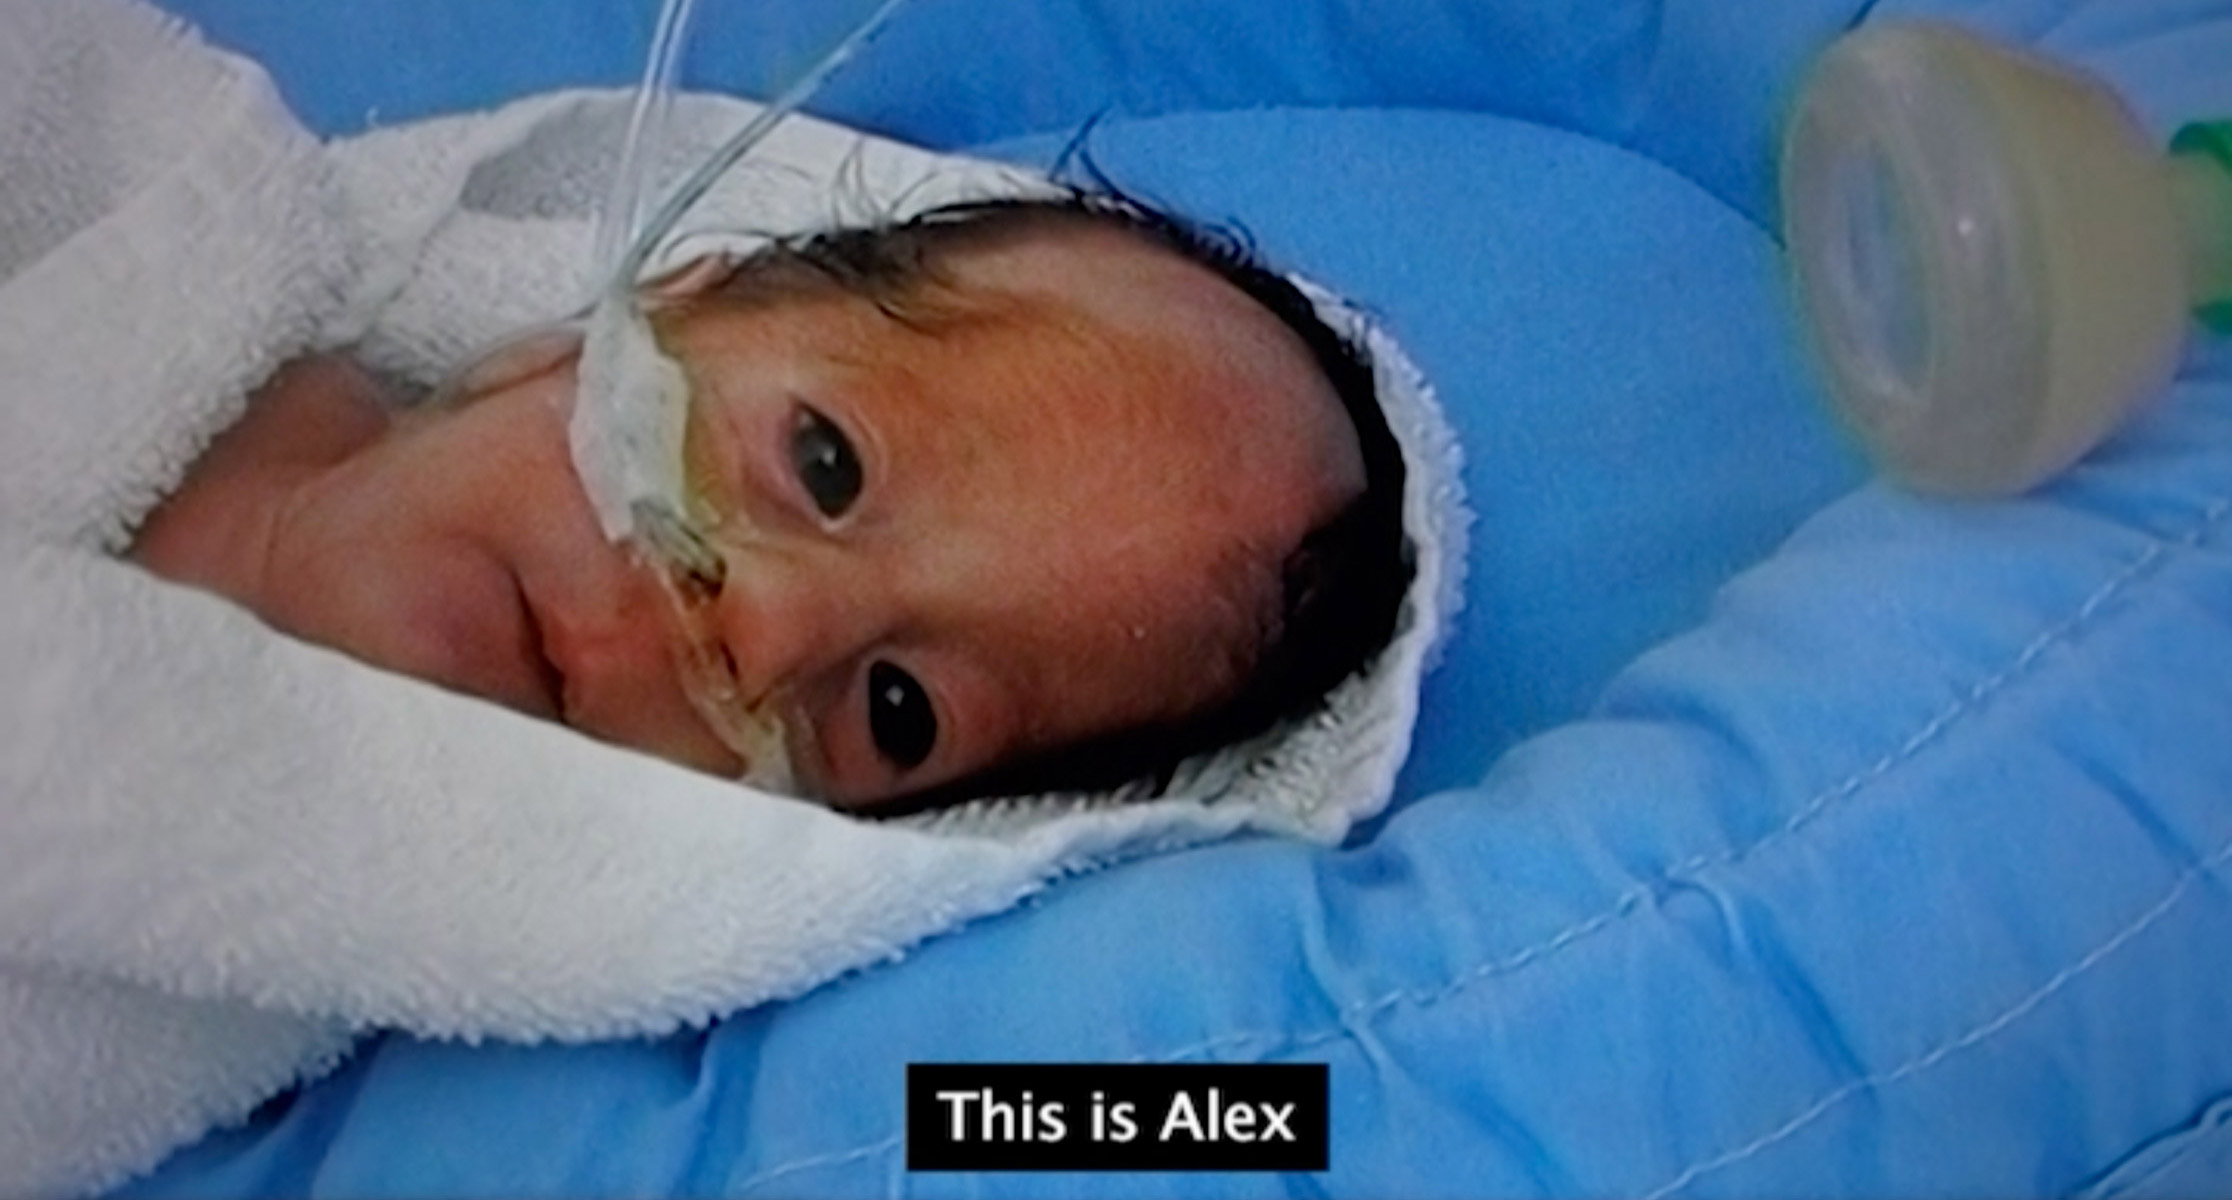 Still image of Alex as a very young baby in hospital, subtitle, this is Alex